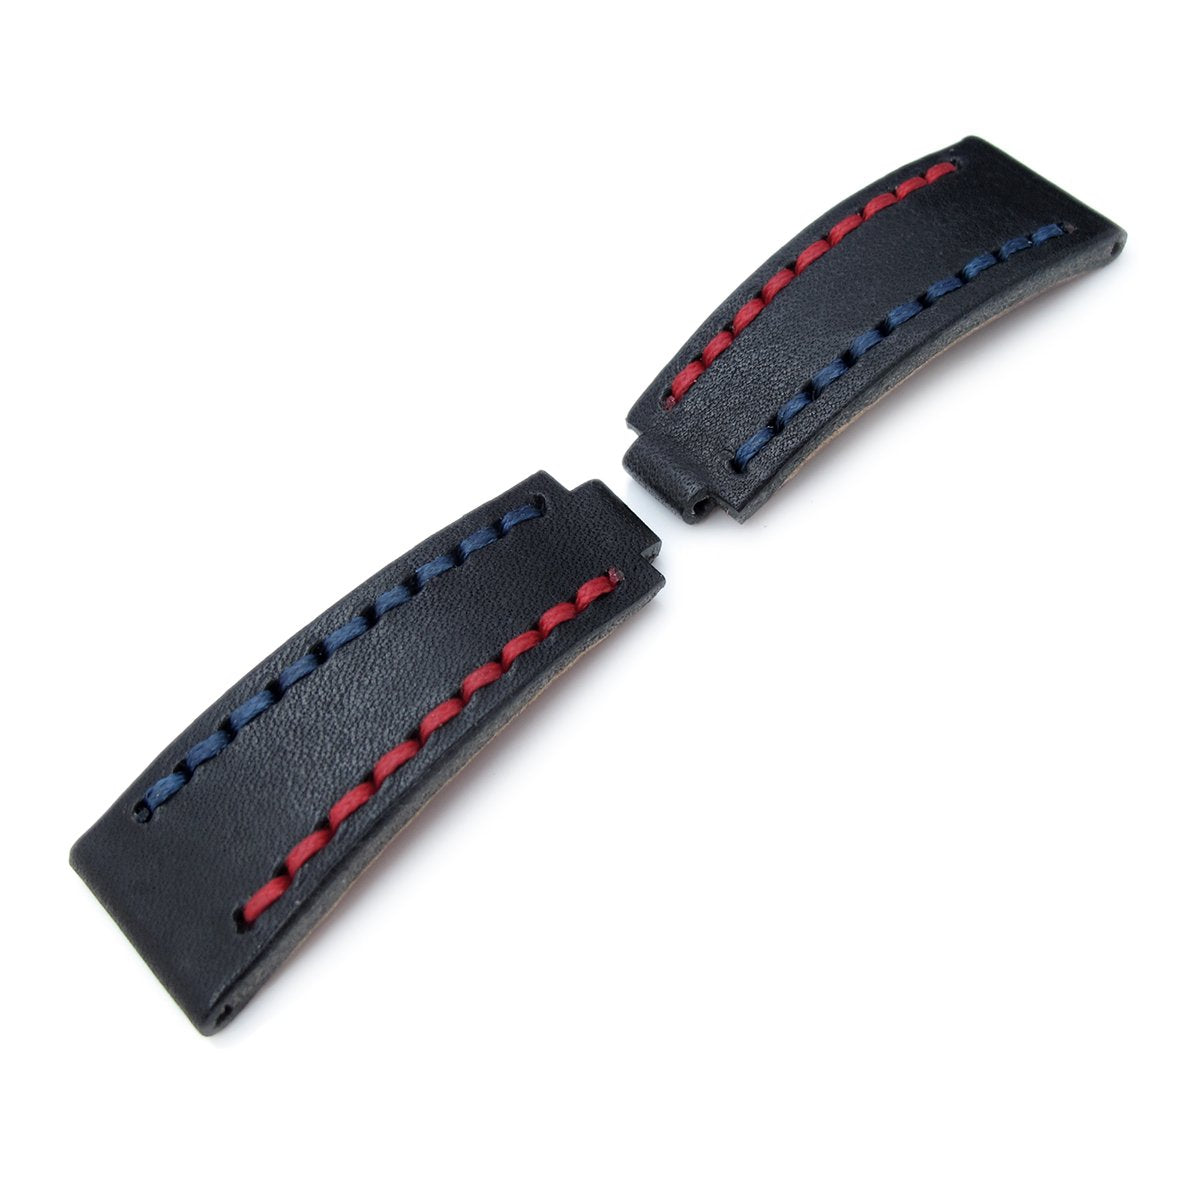 20mm MiLTAT RX 'X' Collection Watch Strap NERO Black Genuine Calf Red + Navy Blue St. Tailor-made for RX SUB & Explo Strapcode Watch Bands